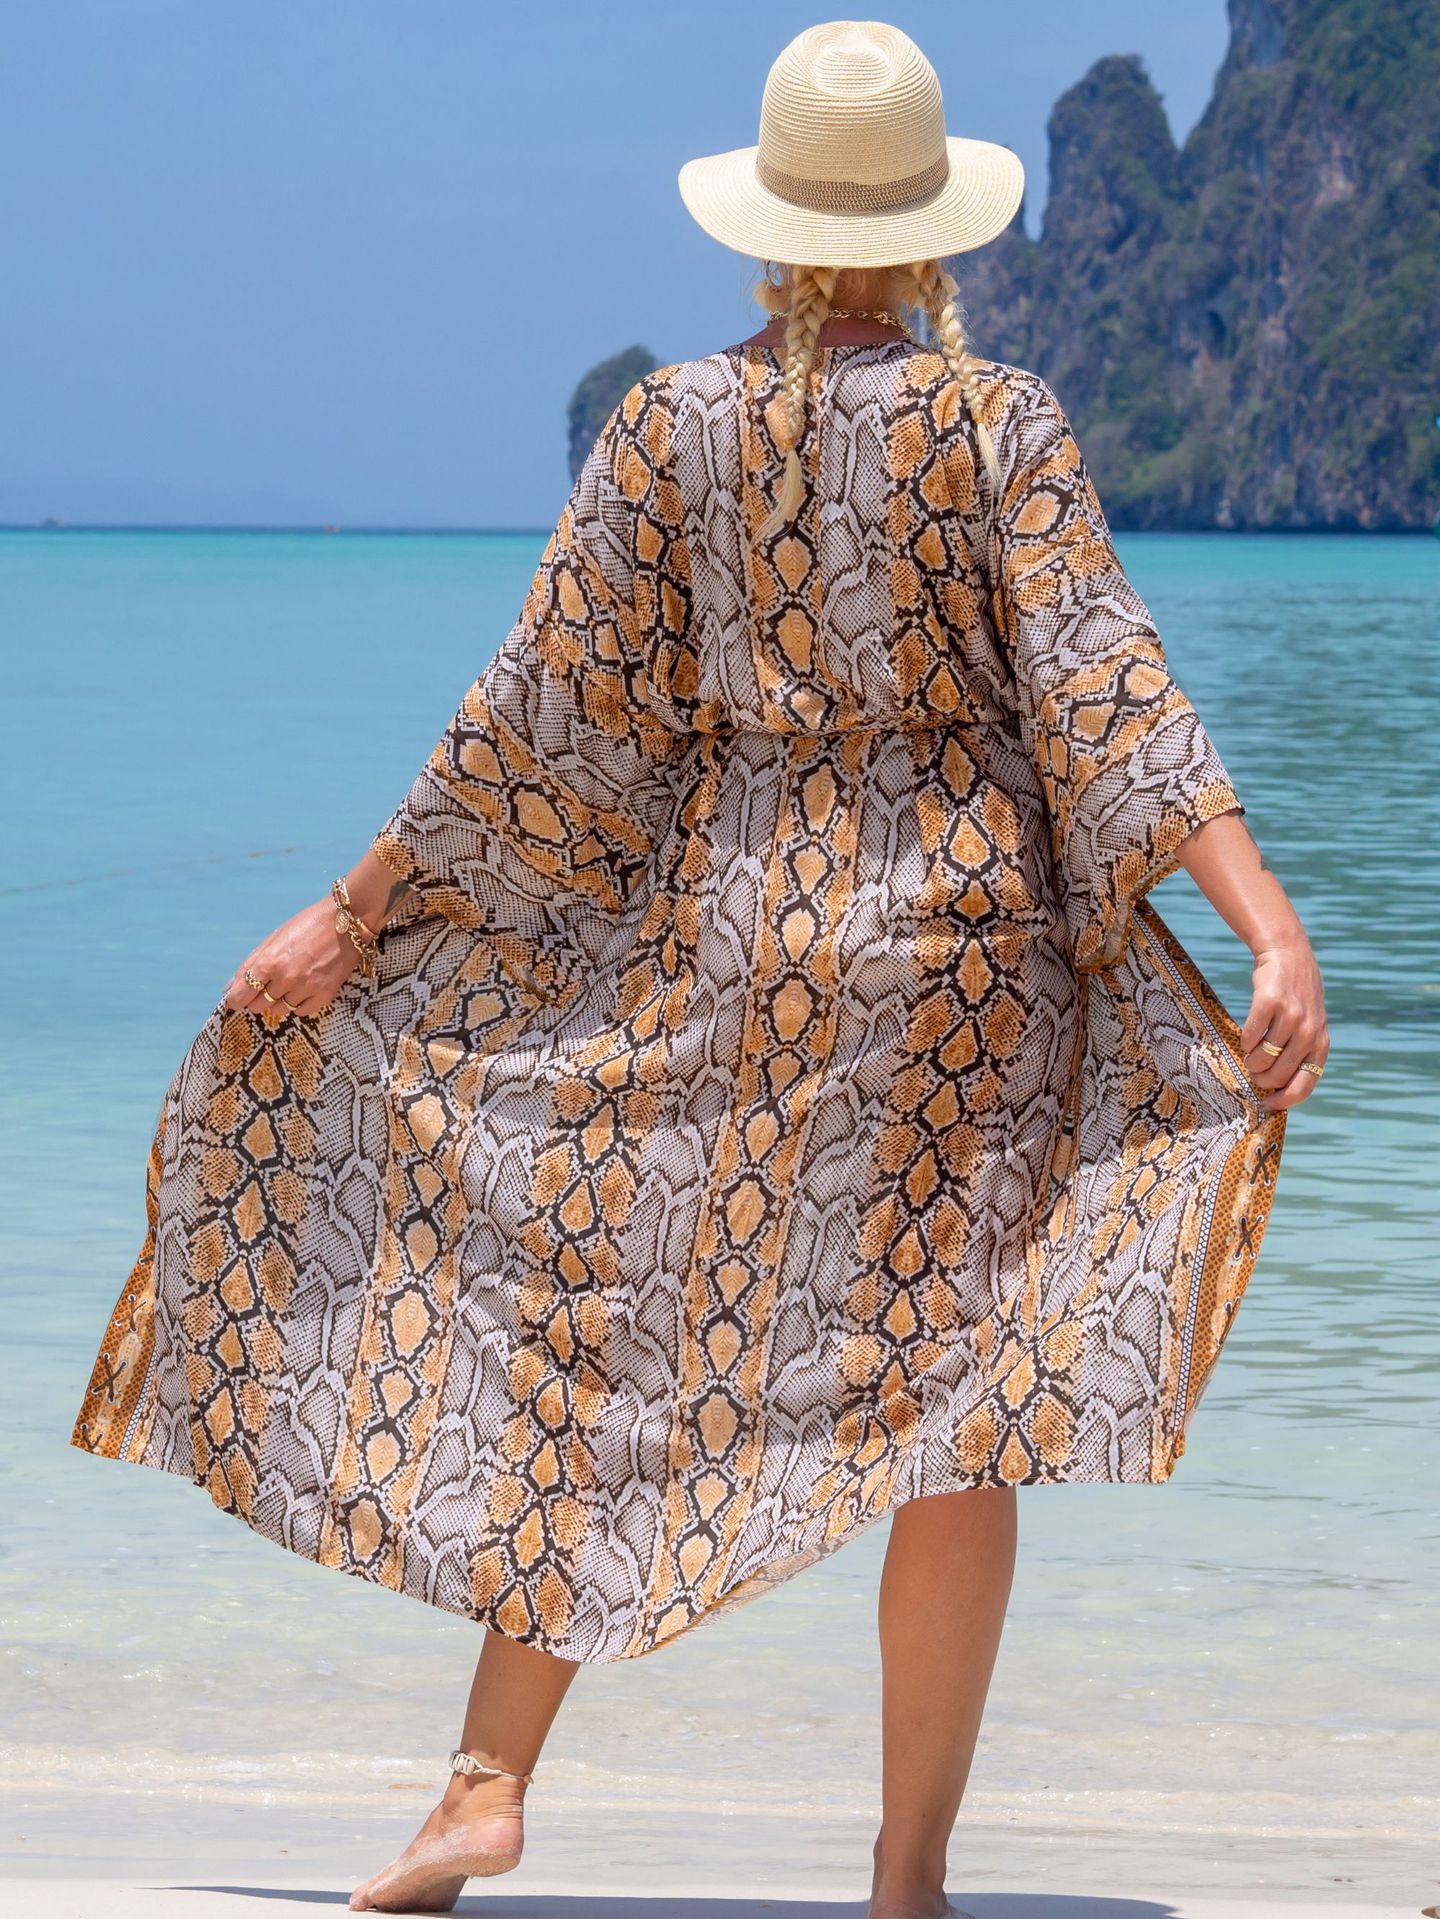 New European And American Rayon Printed Cardigan Beach Skirt Bikini Blouse Swimsuit Outwear Sun Protection Clothing Seaside Vacation Skirt display picture 65